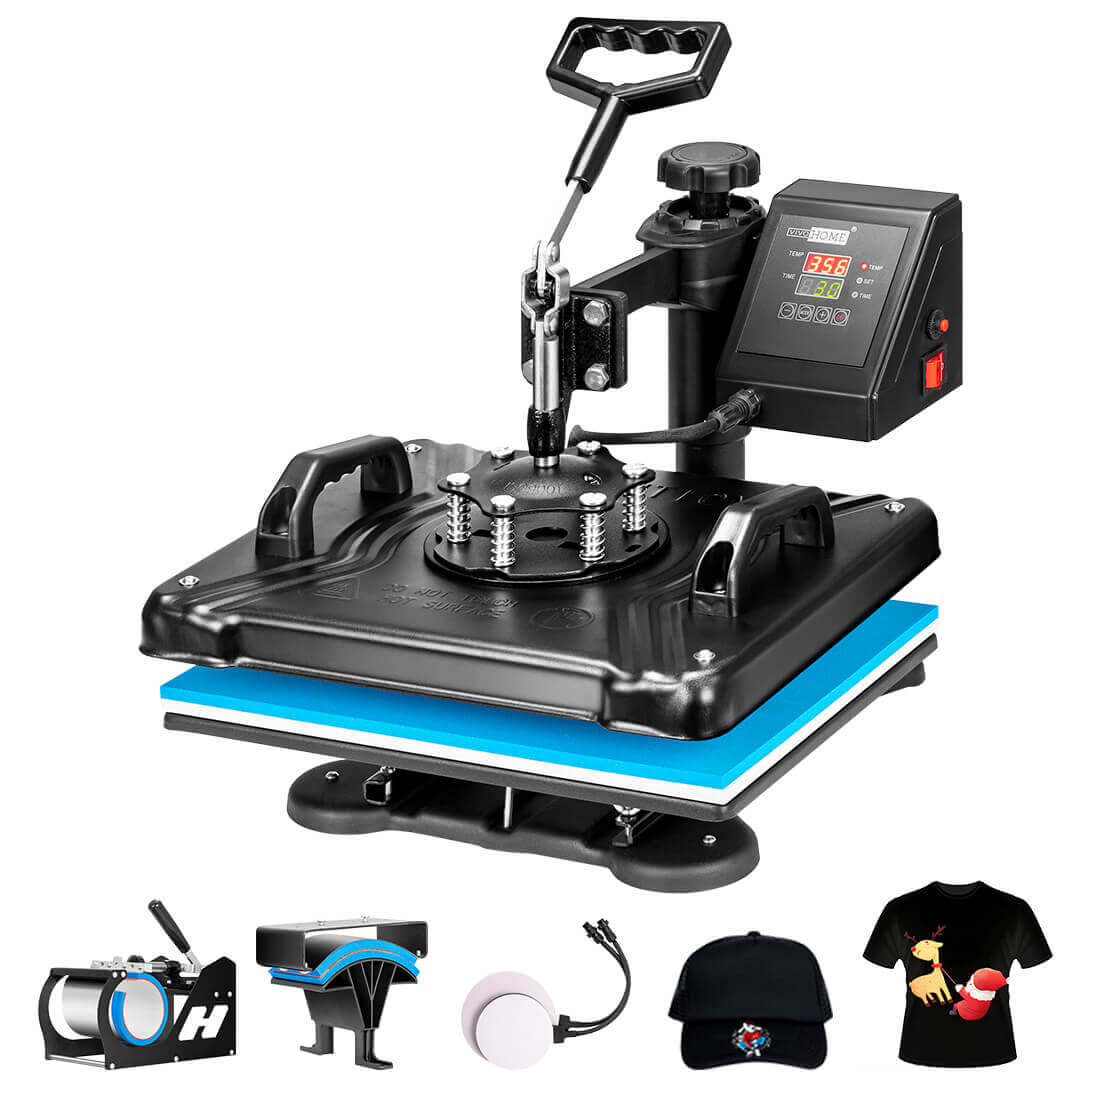 Flawless 8 In 1 Heat Press Machine For T-Shirts, Mugs, Hat